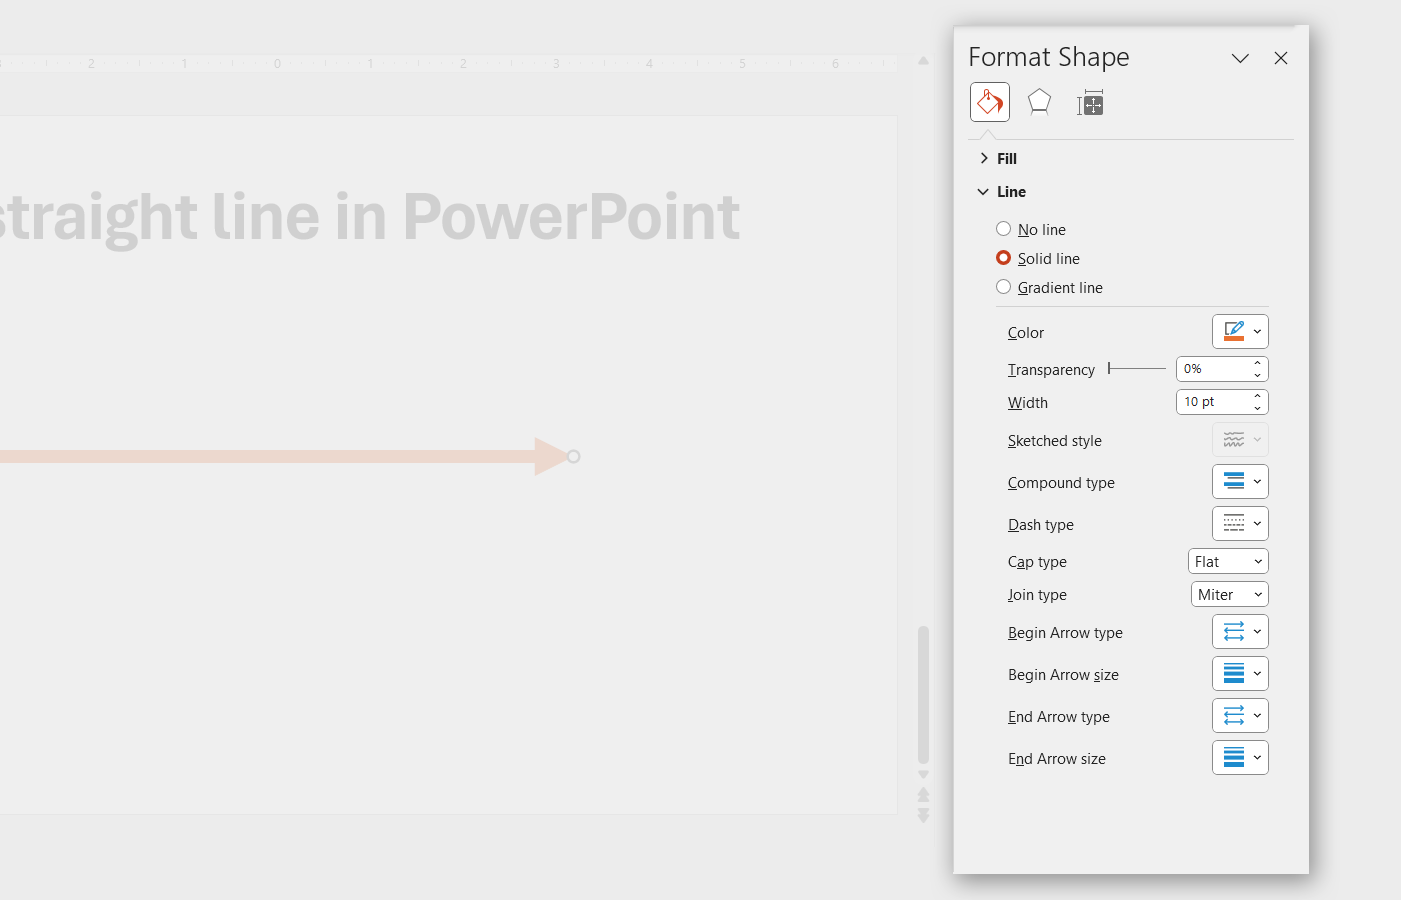 Example of formatting options for lines in PowerPoint (shape size, width, fill options, transparency level, sketched style, dash type)